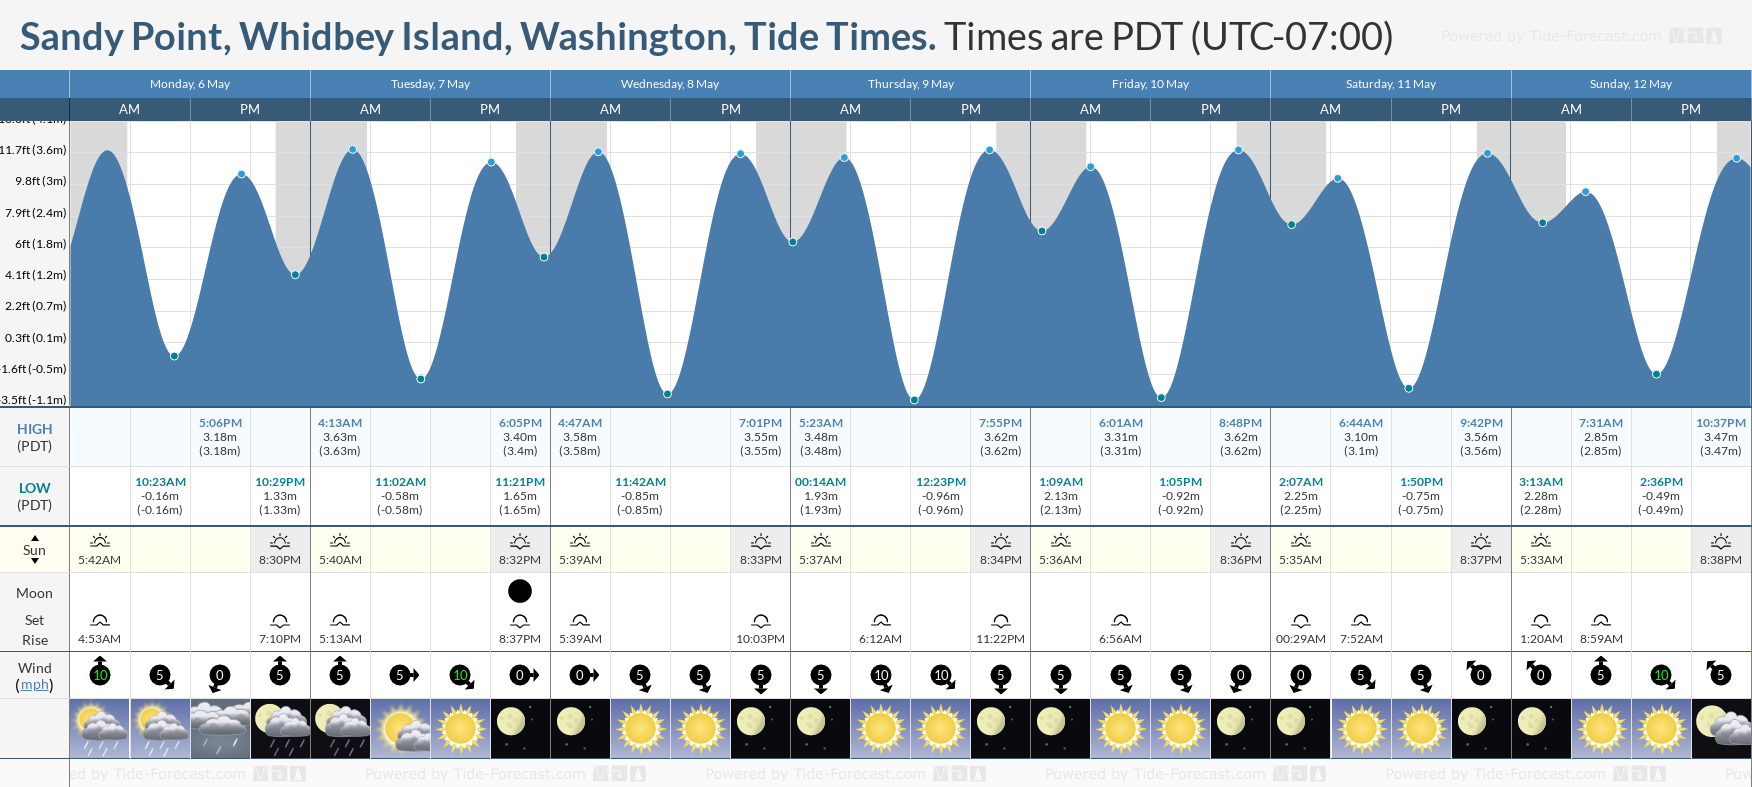 Sandy Point, Whidbey Island, Washington Tide Chart including high and low tide tide times for the next 7 days